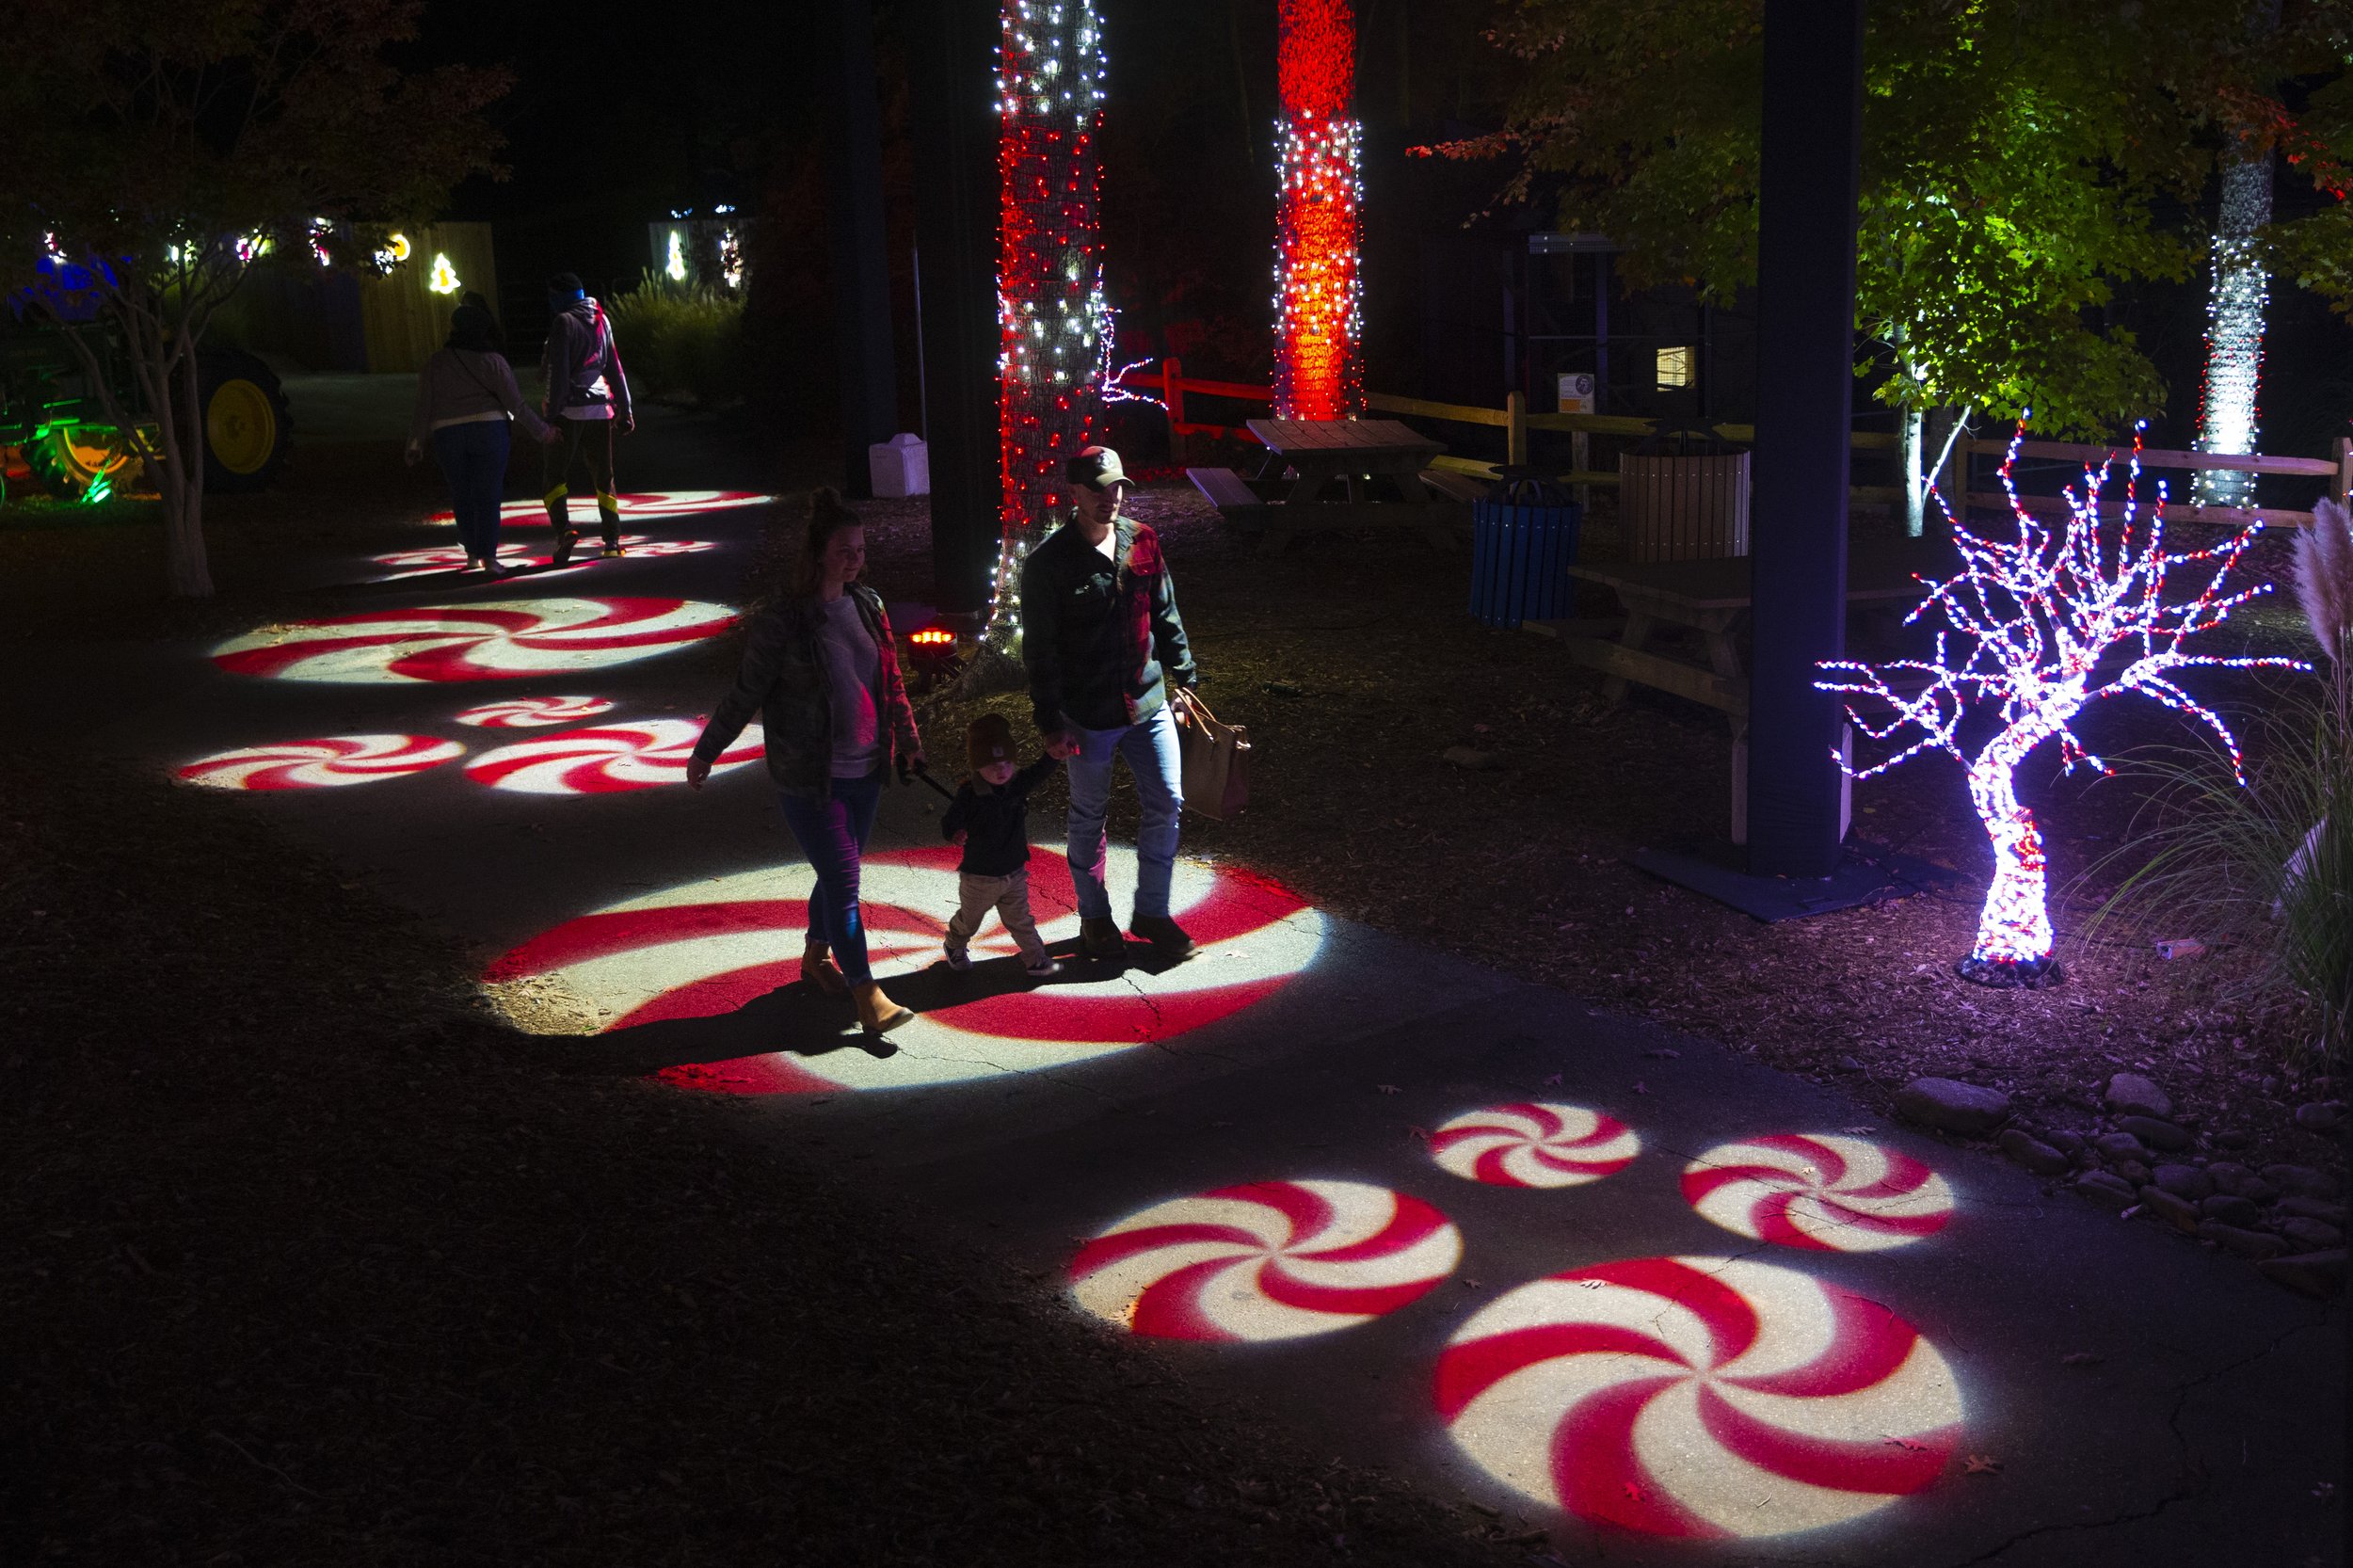  Visitors make their way down a peppermint path projected on the ground on the opening night of Winter Wonderlights at the Greensboro Science Center in Greensboro, N.C., on Saturday, November 6, 2021.  